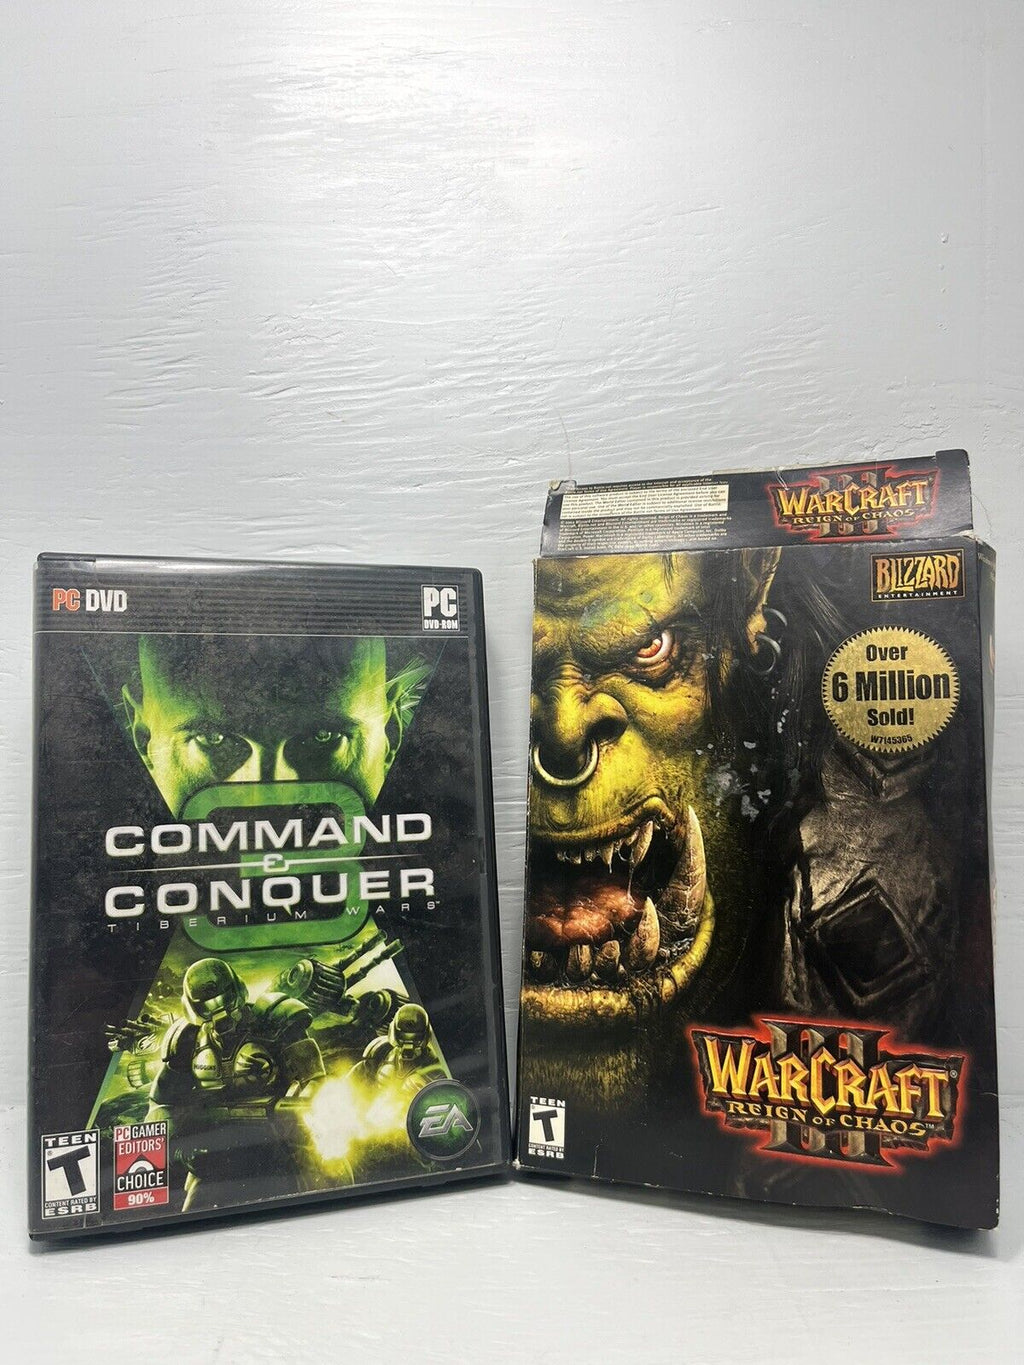 Command And Conquer 3 Tiberium Wars PC DVD ROM & Warcraft 3 Reign Of Chaos PC - Hype Stew Sneakers Detroit